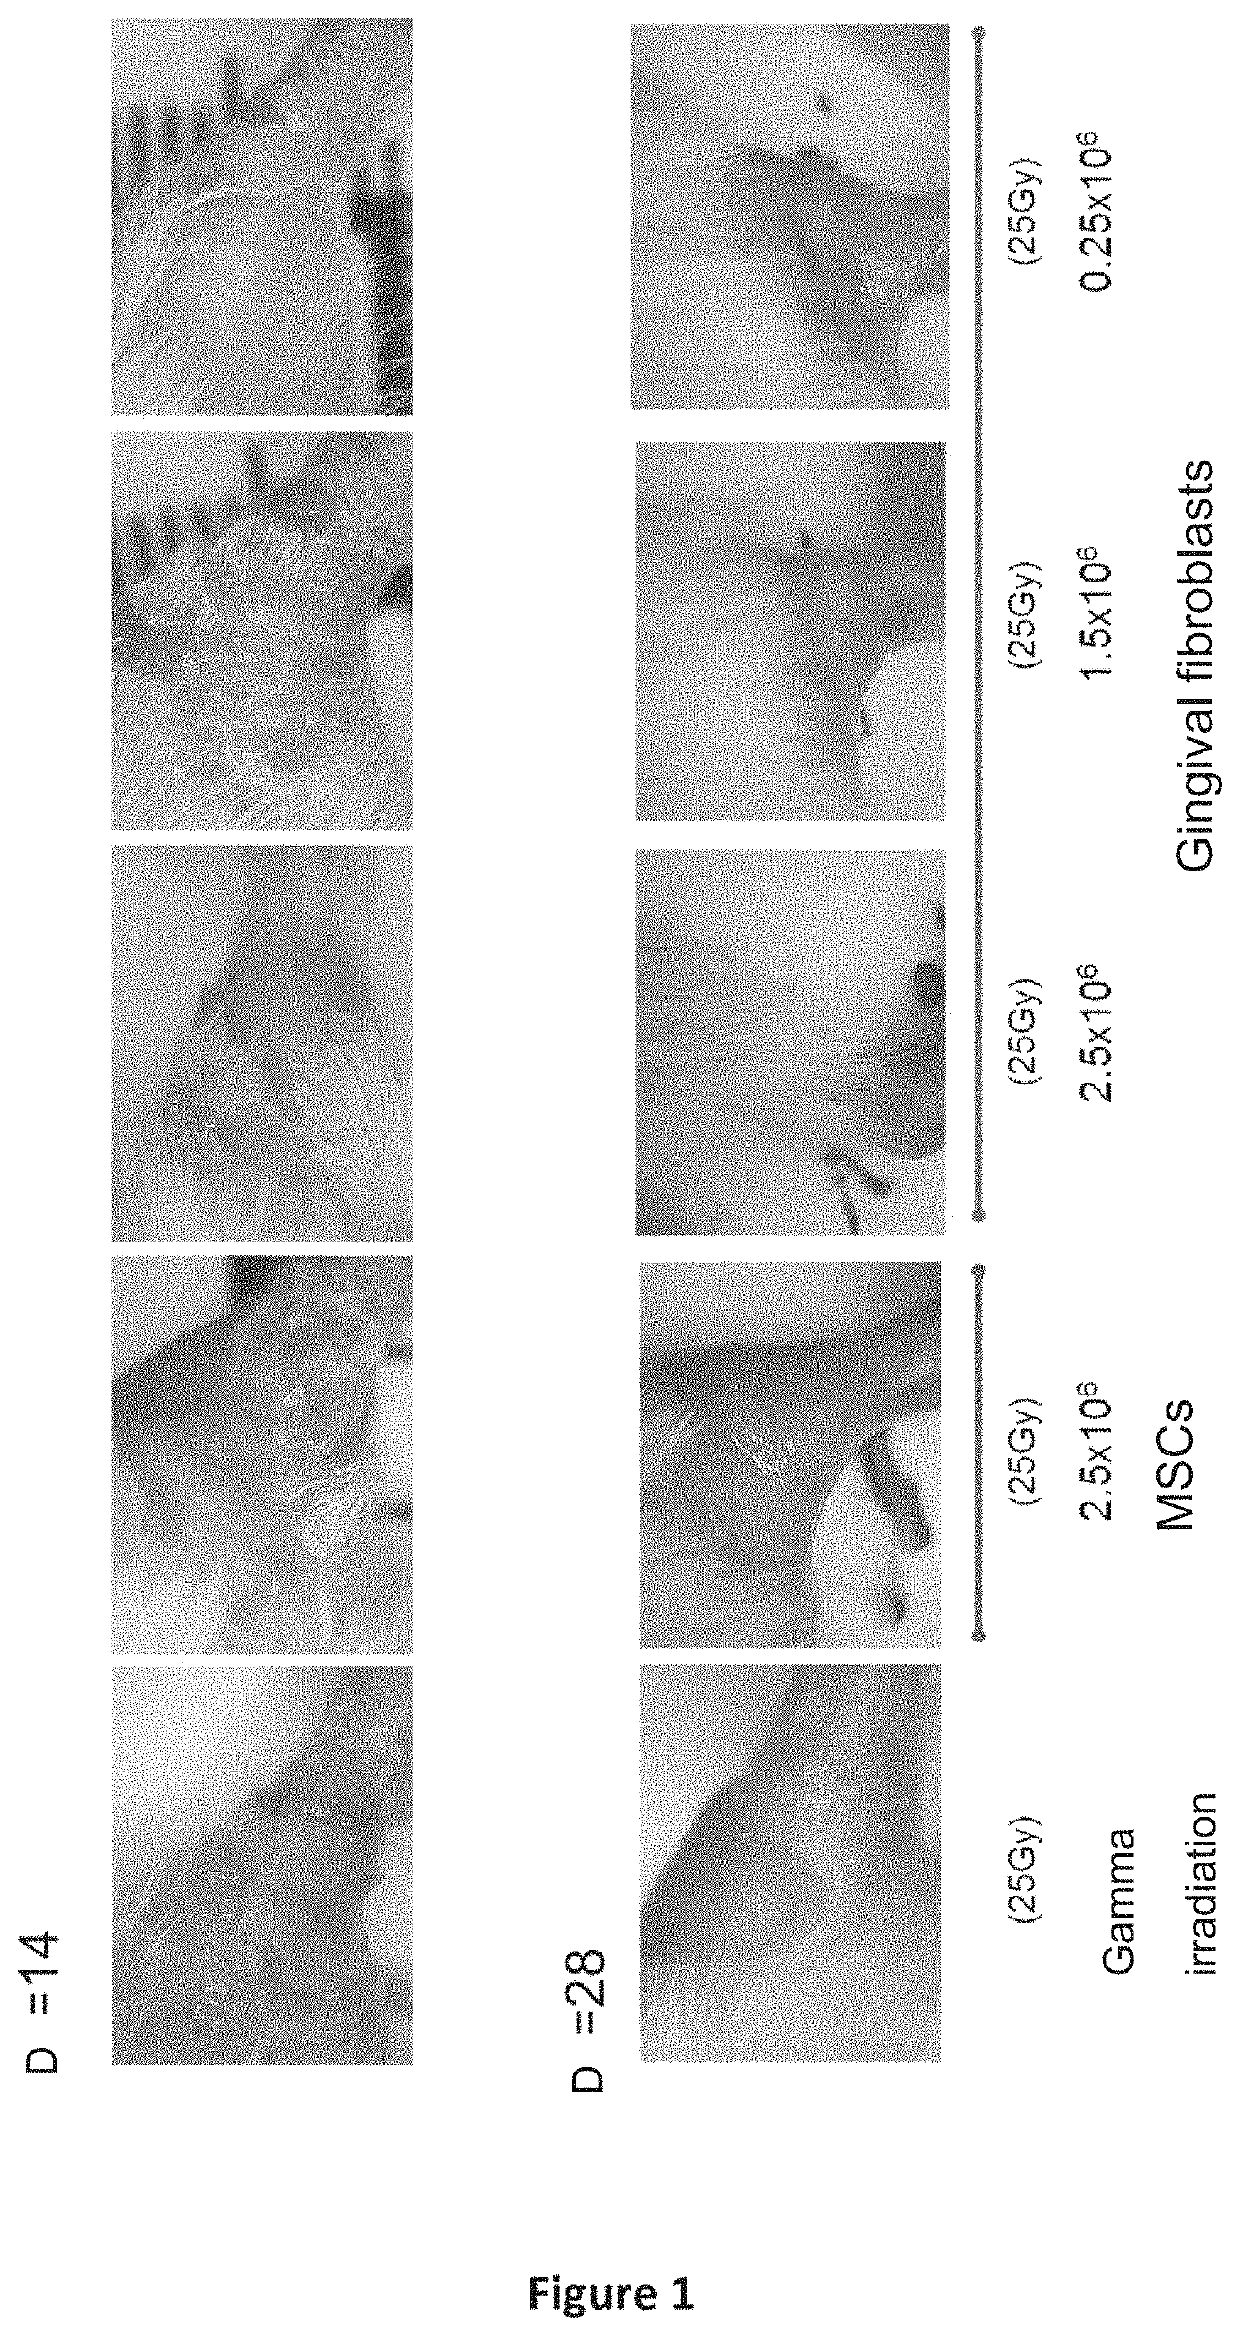 Use of gingival fibroblasts in the treatment of alopecia